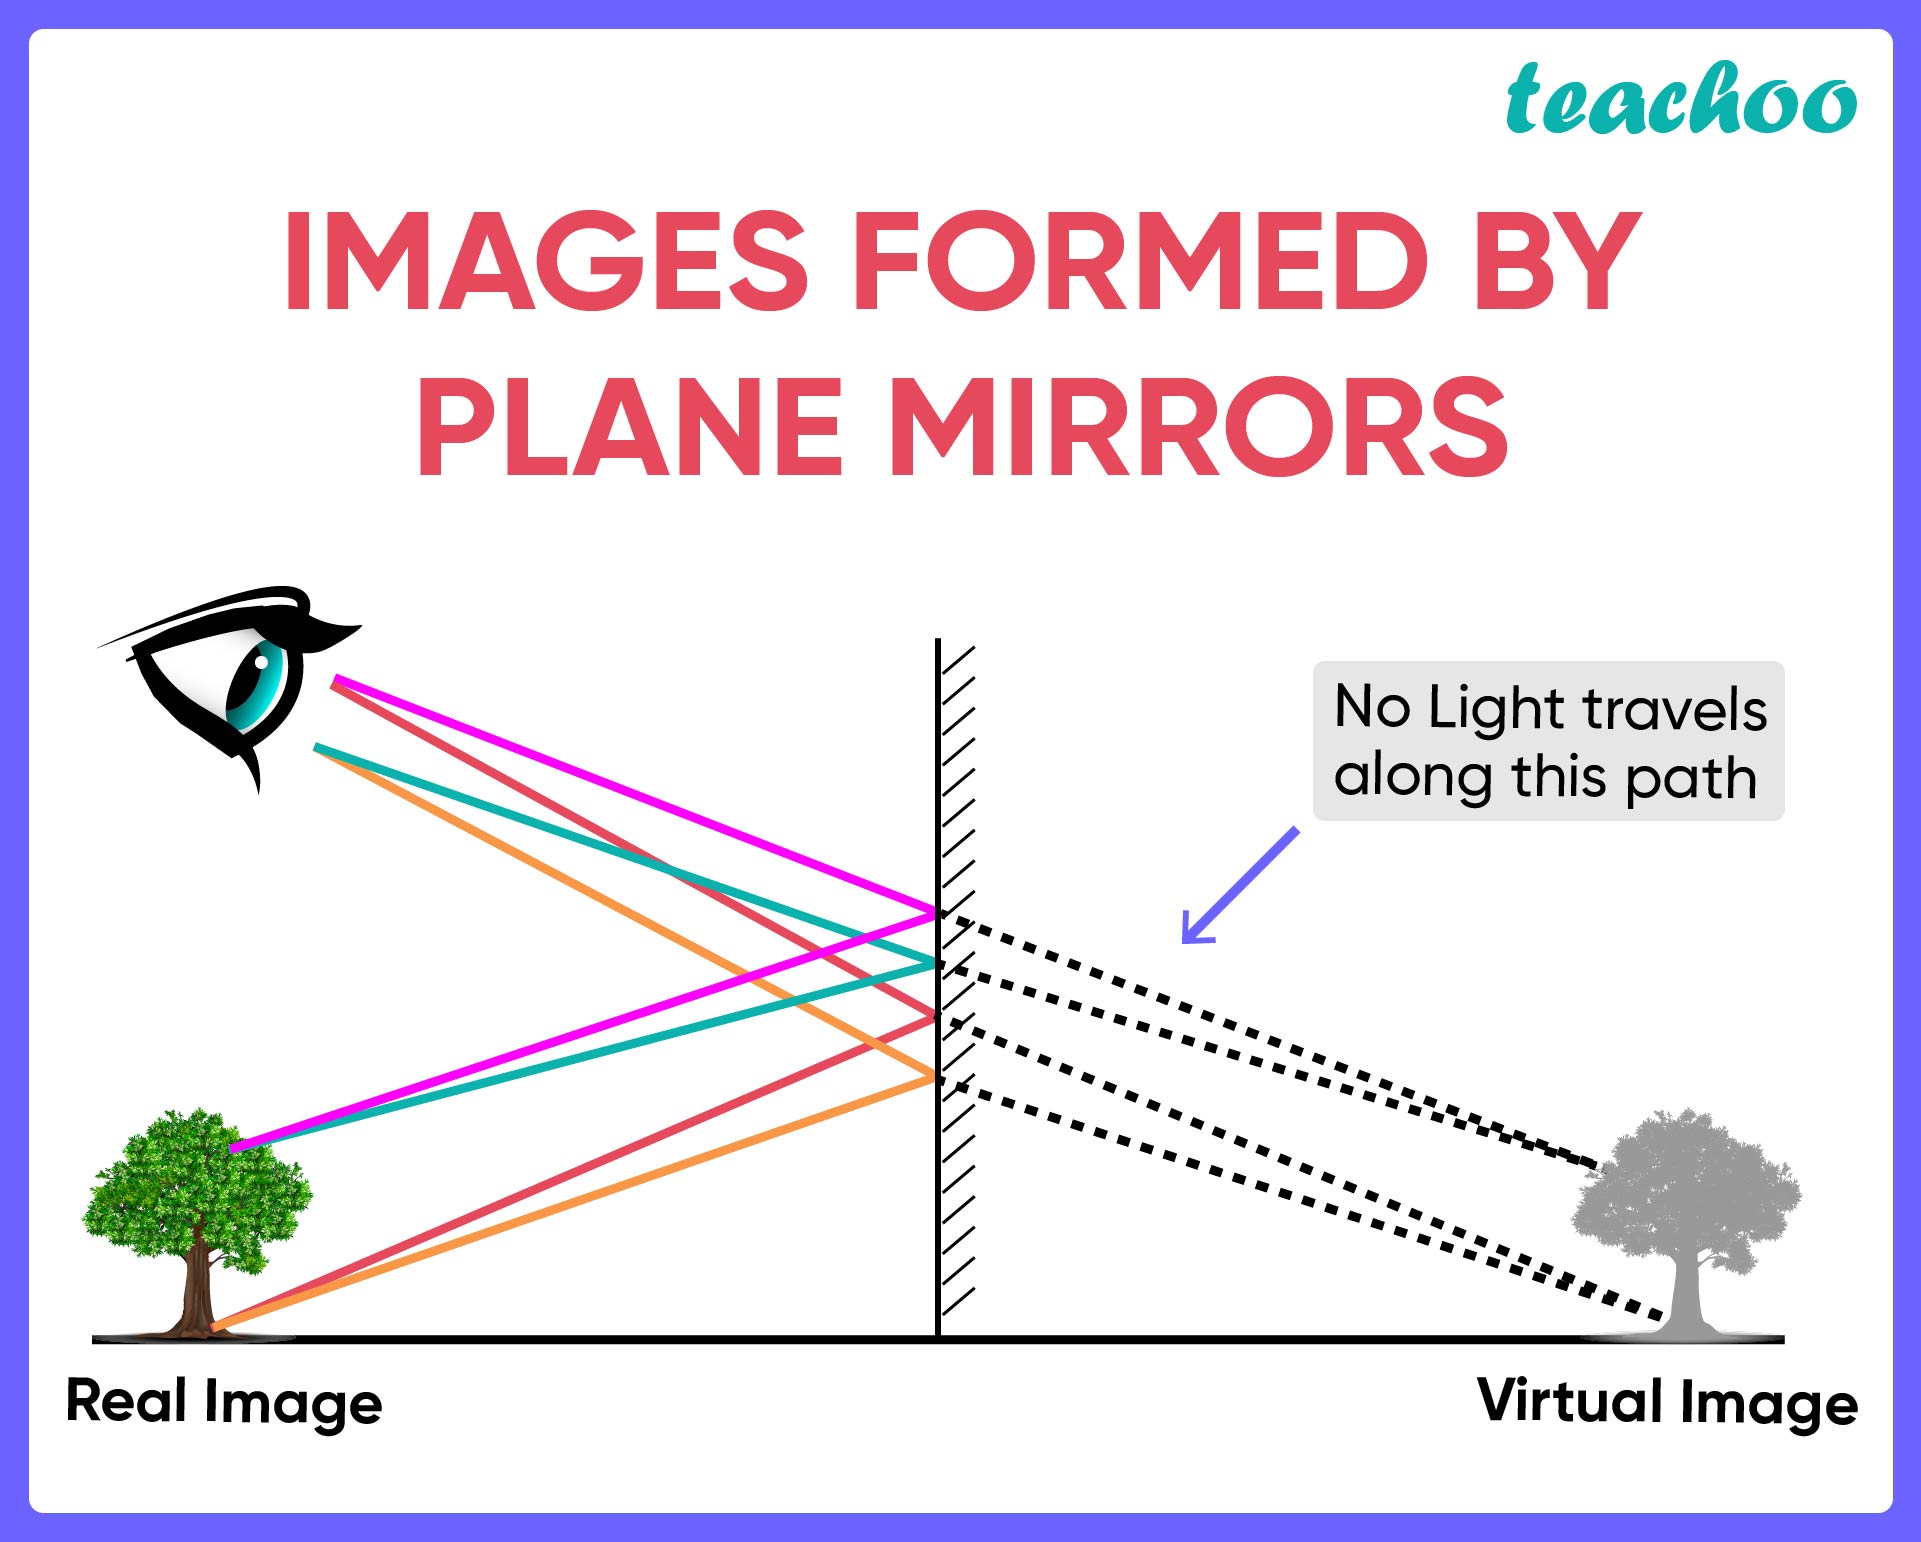 What Is The Image Formed By A Plane Mirror